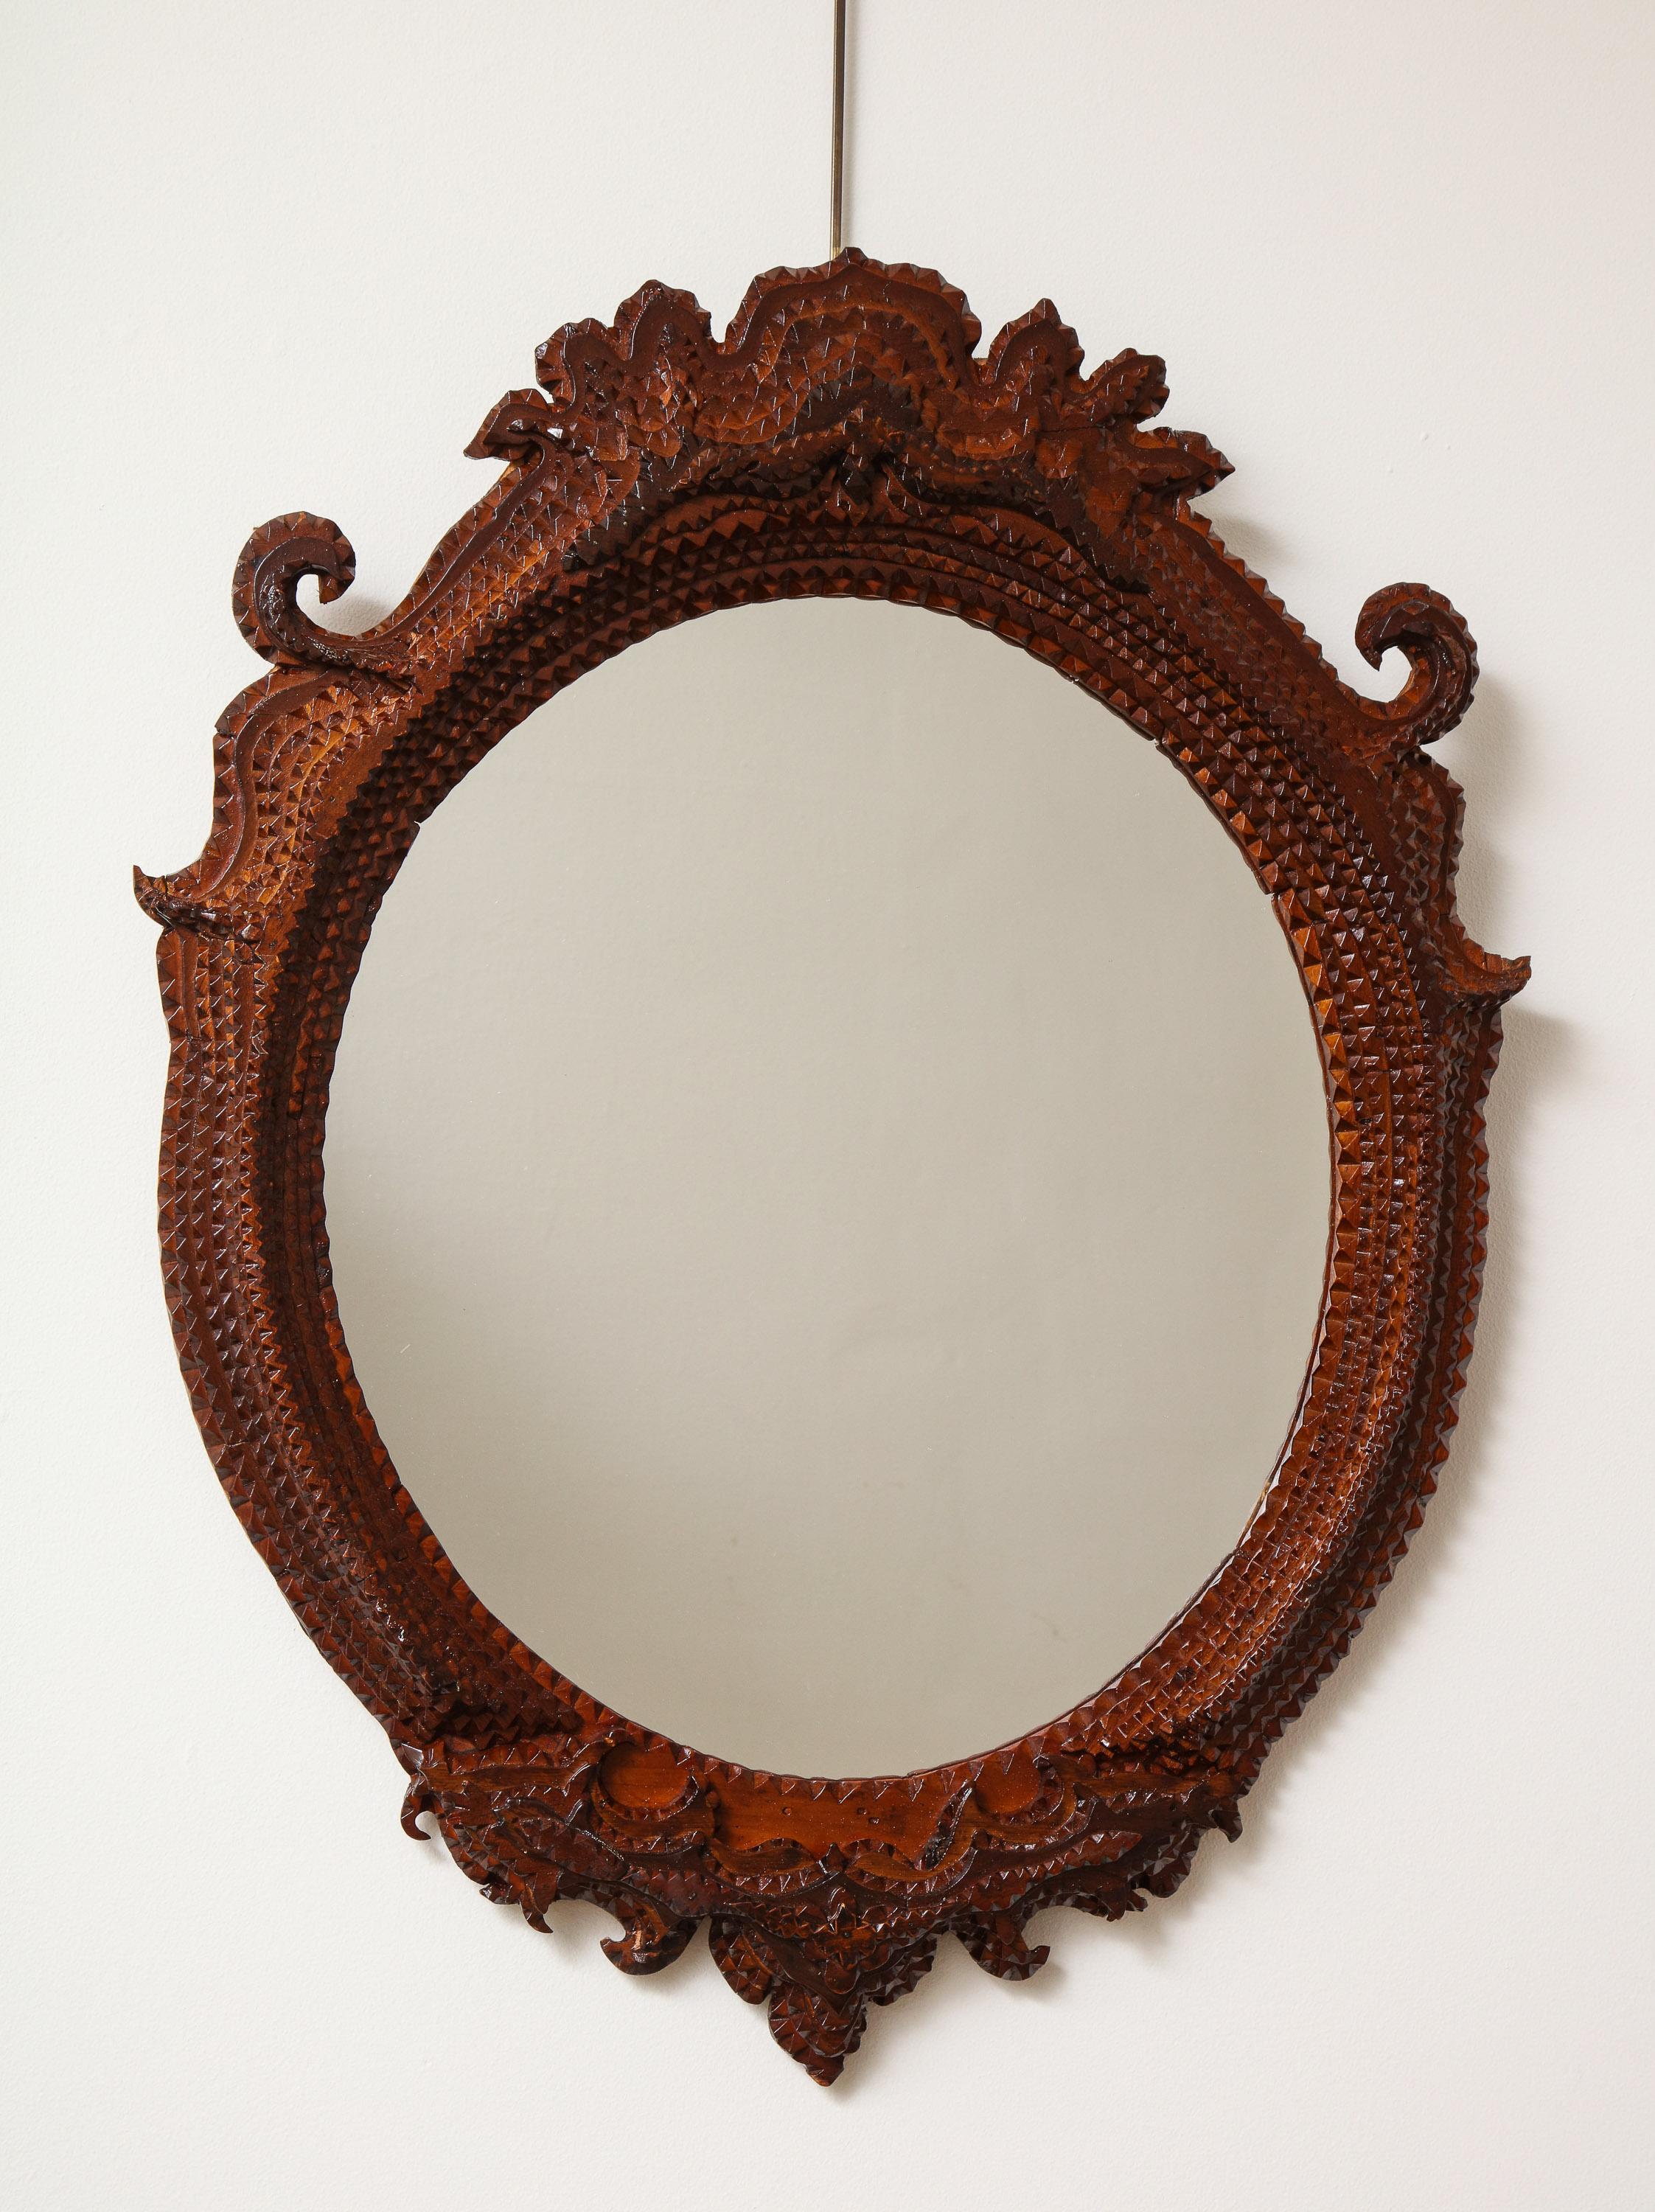 Early 20th century, carved tramp art mirror.